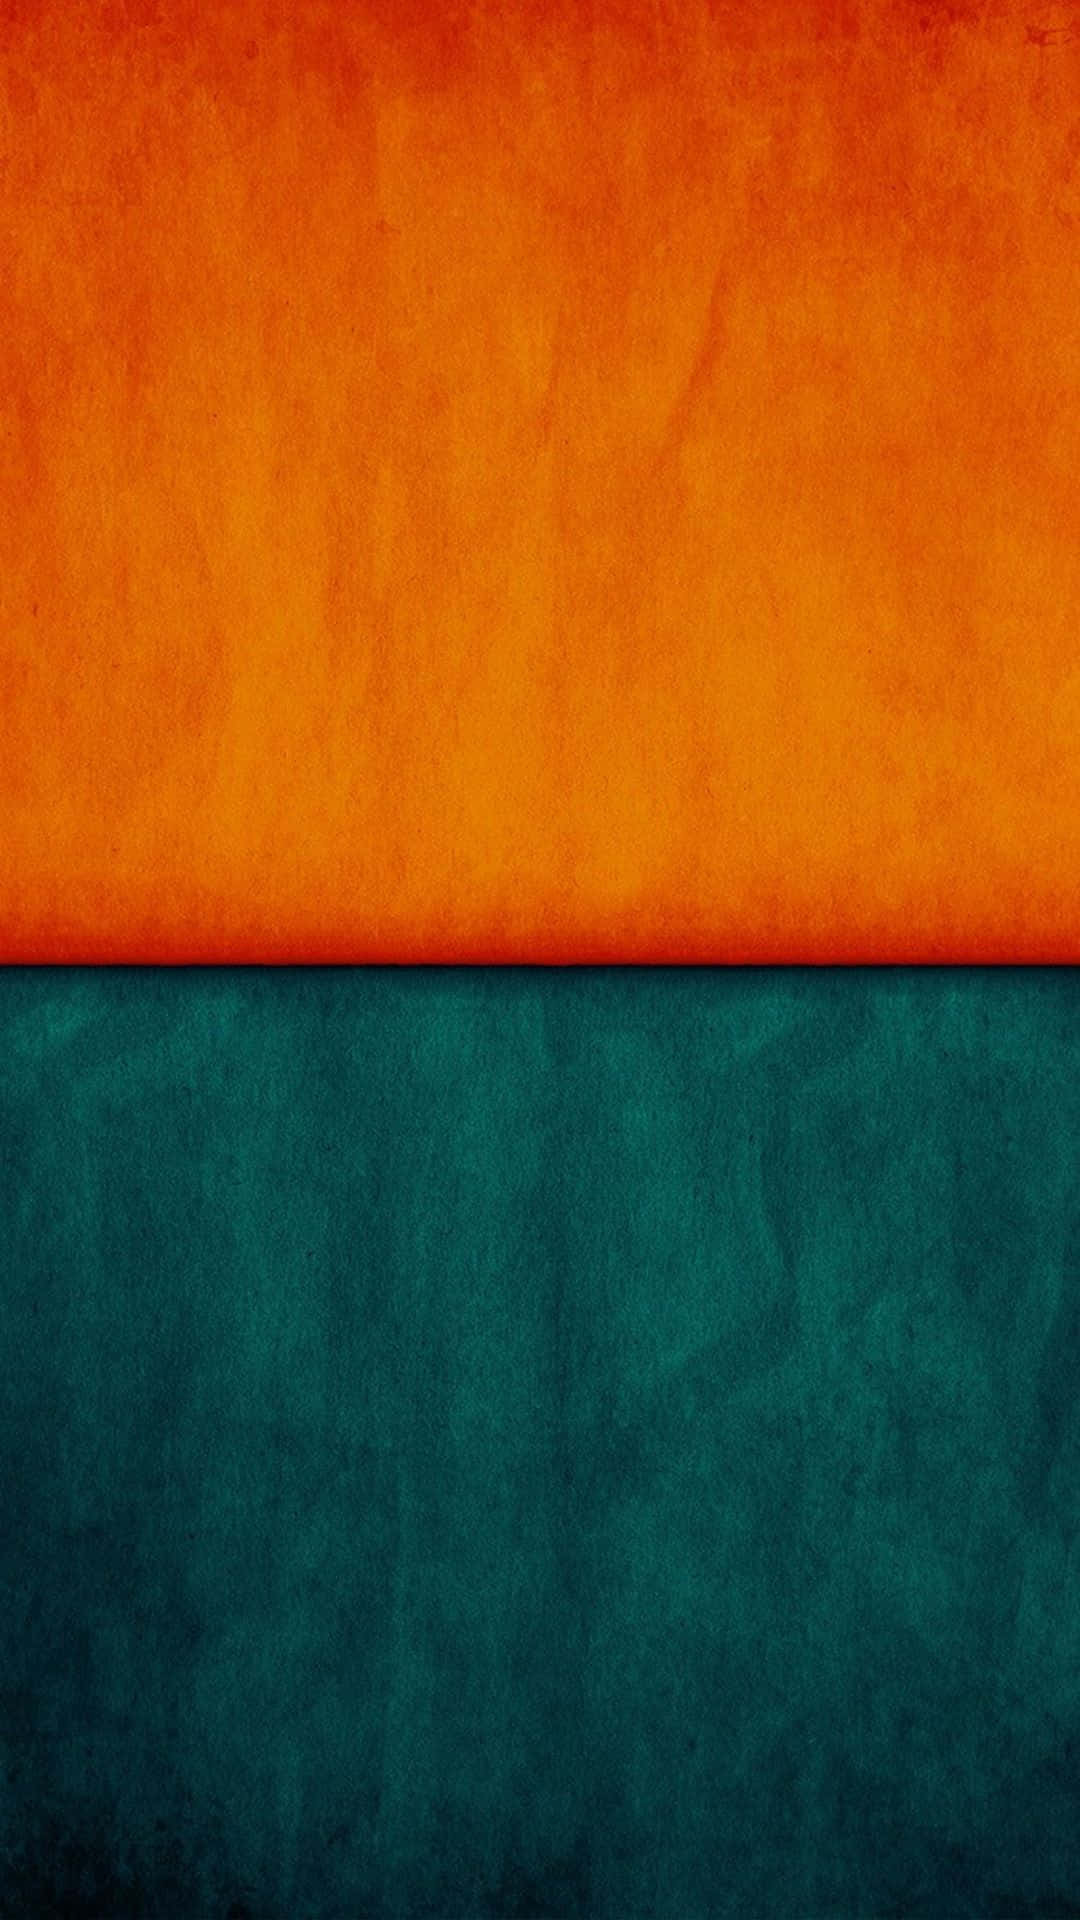 Abstract Blue and Orange Wallpaper